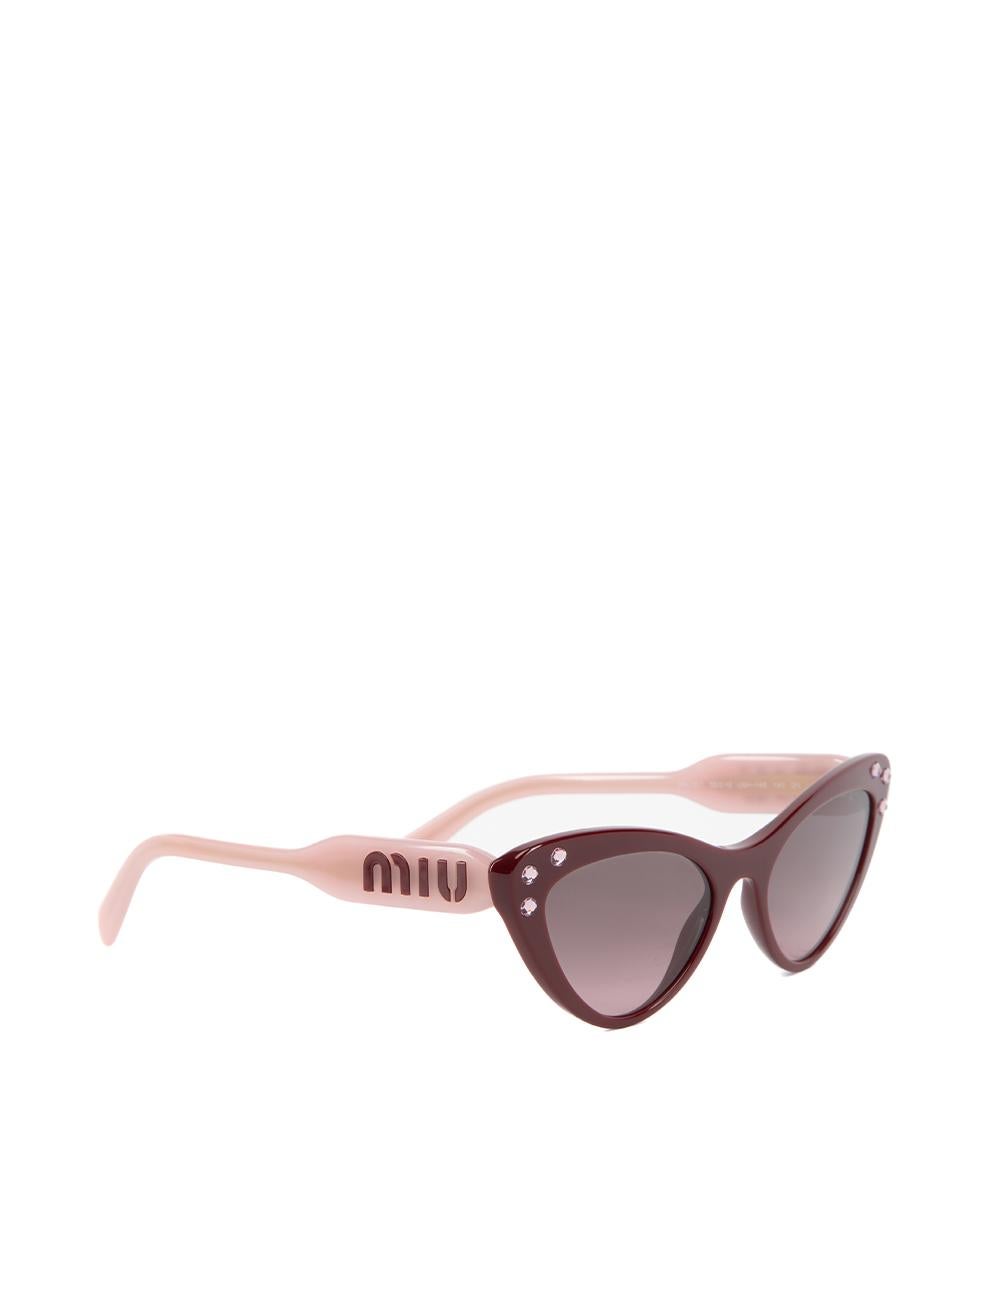 CONDITION is Very good. Hardly any visible wear to glasses is evident. Marking on the case can be seen on this used Miu Miu designer resale item. This item comes with original case.  Details  Burgundy and pink Acetate Cat eye Crystal embellished on